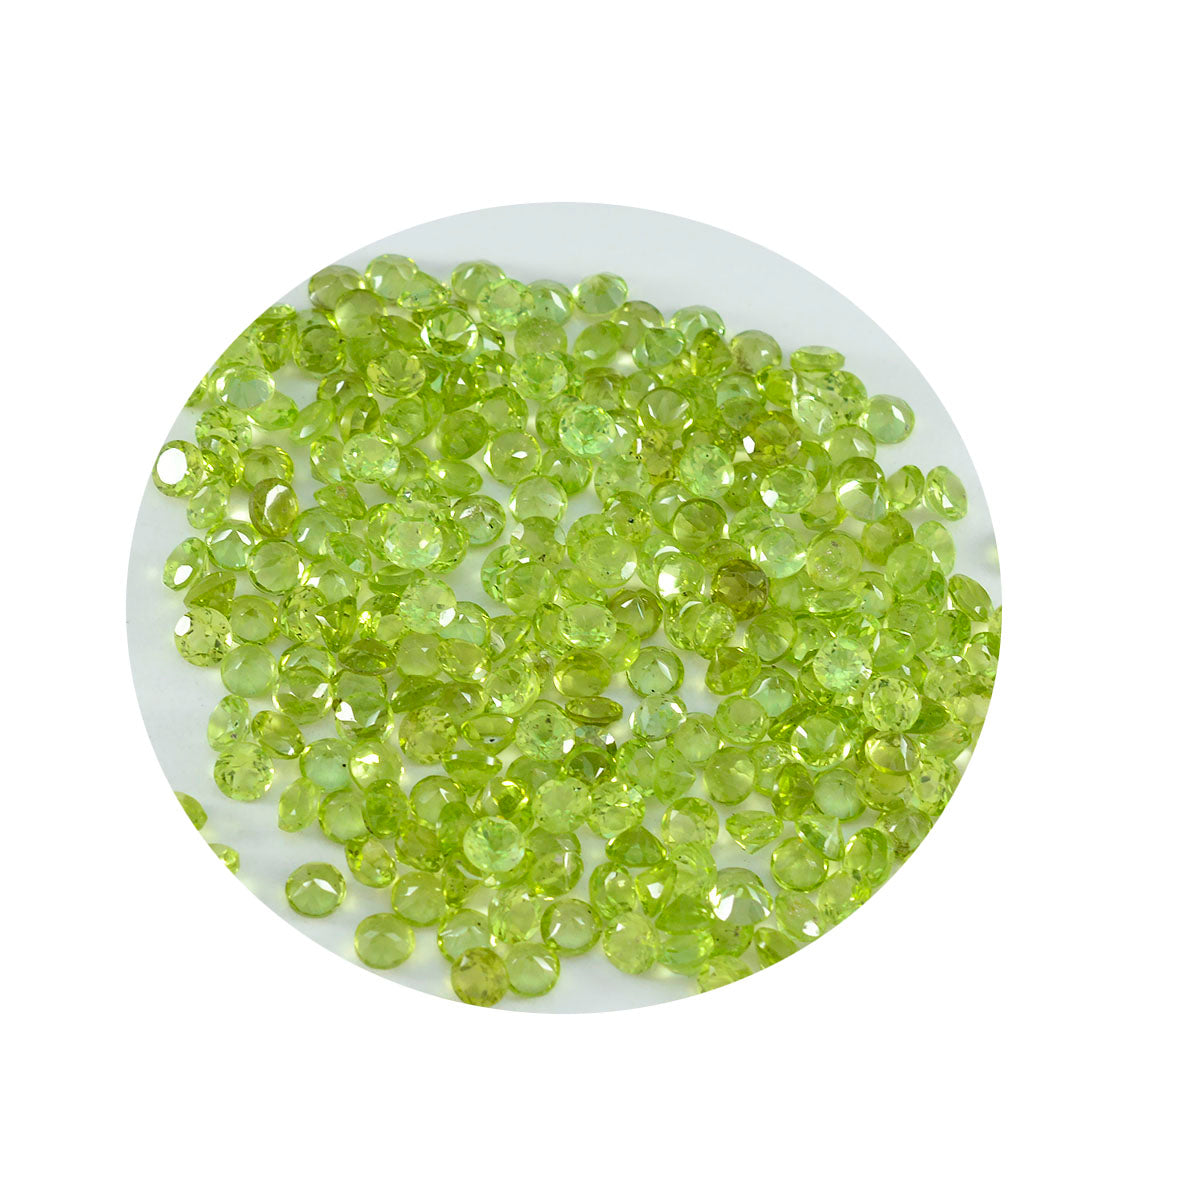 Riyogems 1PC Natural Green Peridot Faceted 2x2 mm Round Shape beauty Quality Loose Gemstone